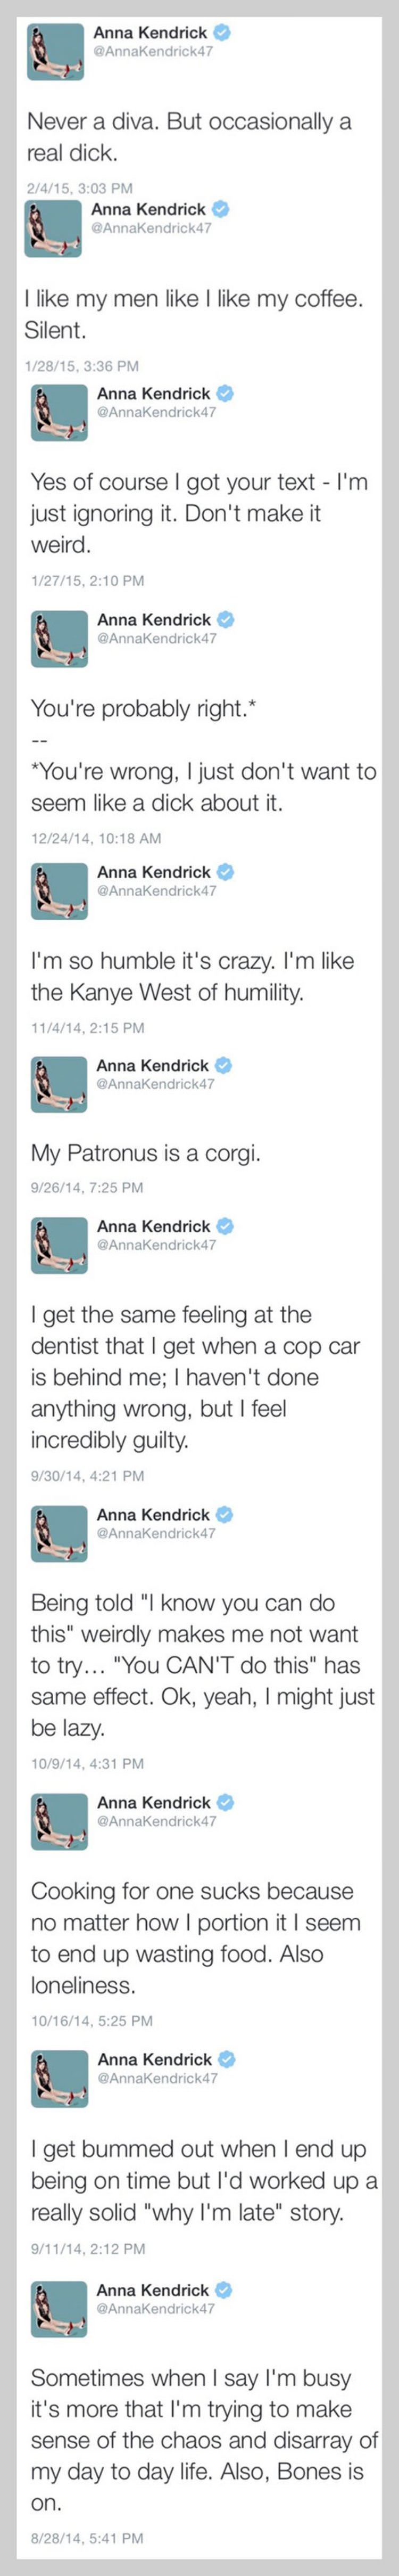 anna kendrick twitter funny picture